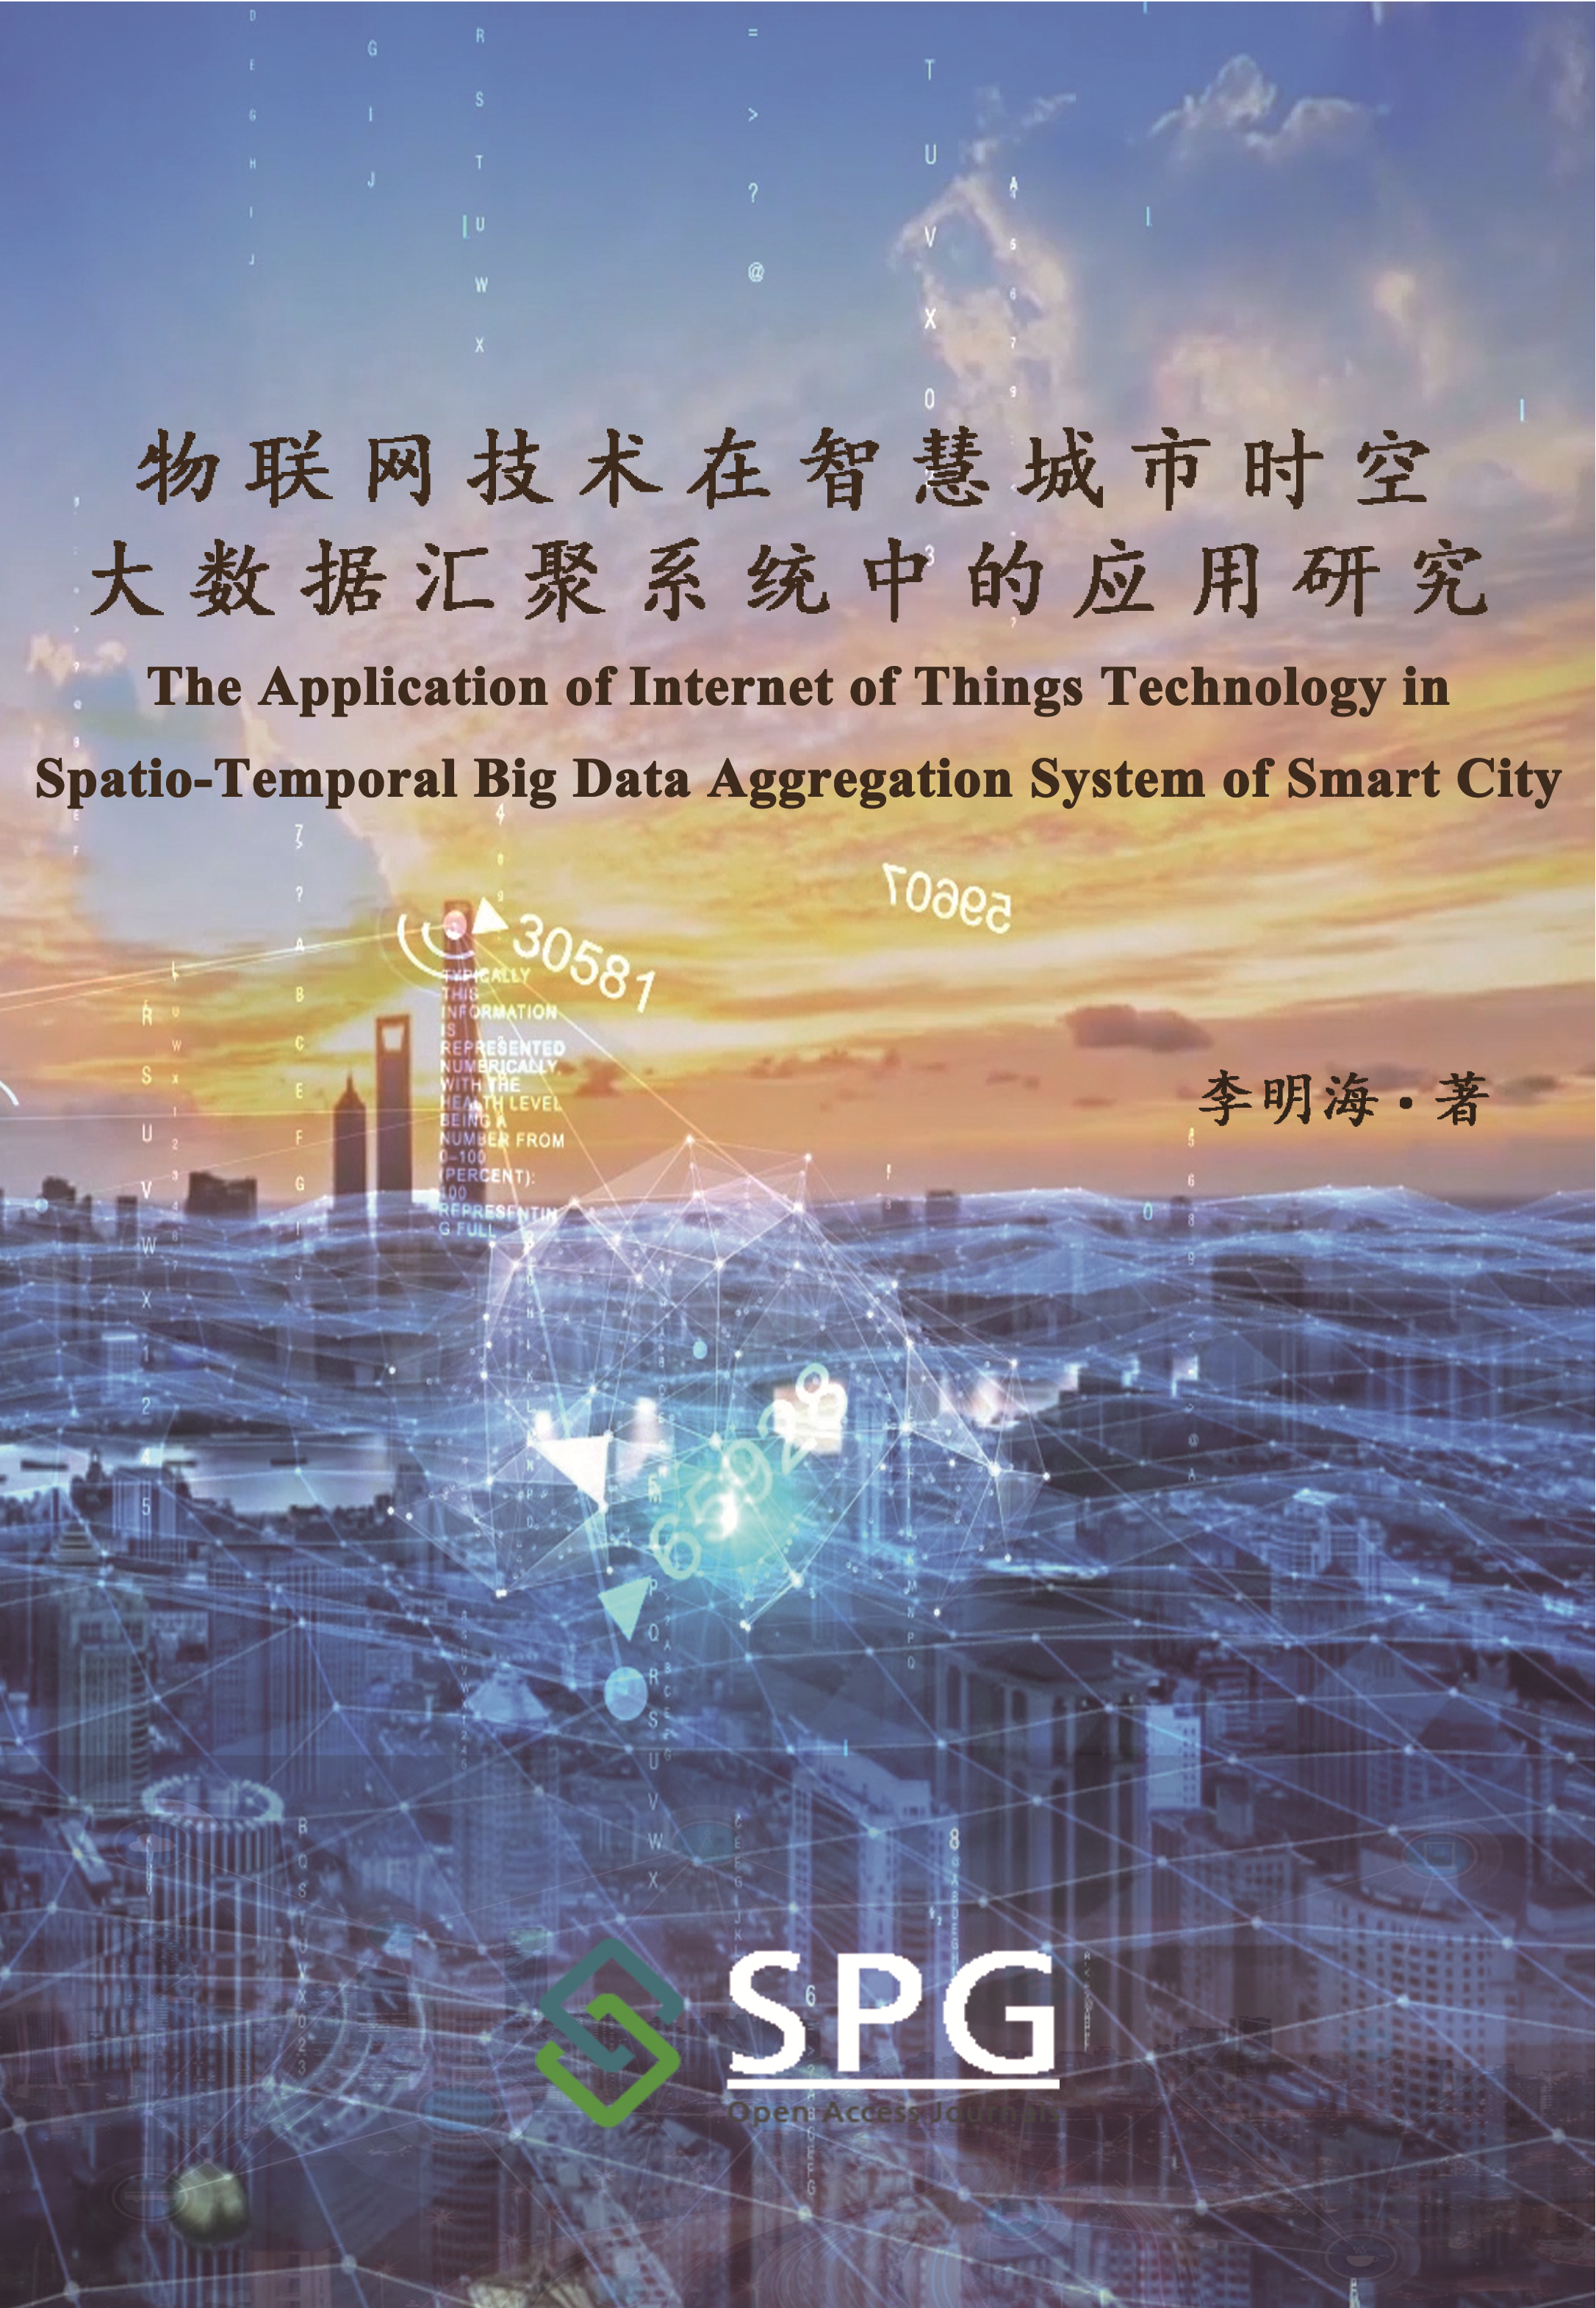 The Application of Internet of Things Technology in Spatio-Temporal Big Data Aggregation System of Smart City | Scholar Publishing Group